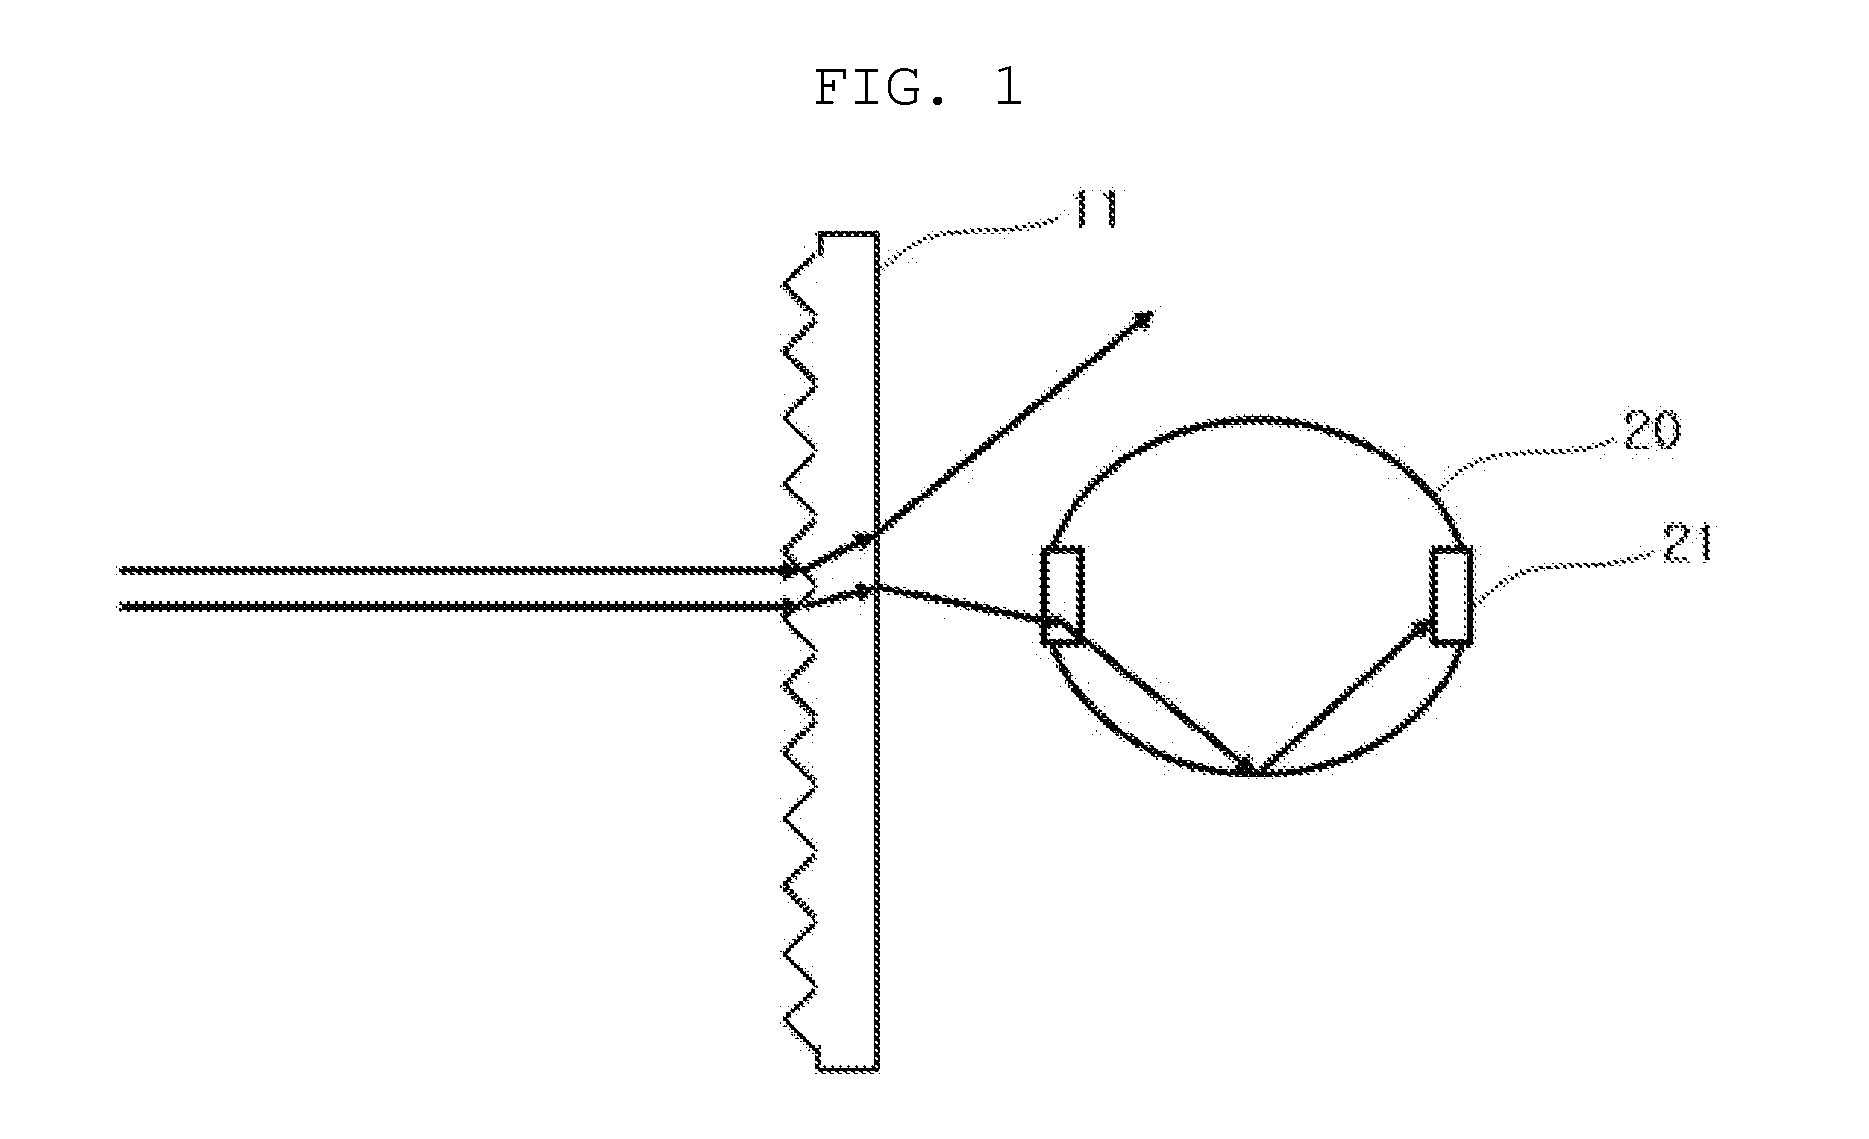 Apparatus for measuring transmissivity of patterned glass substrate